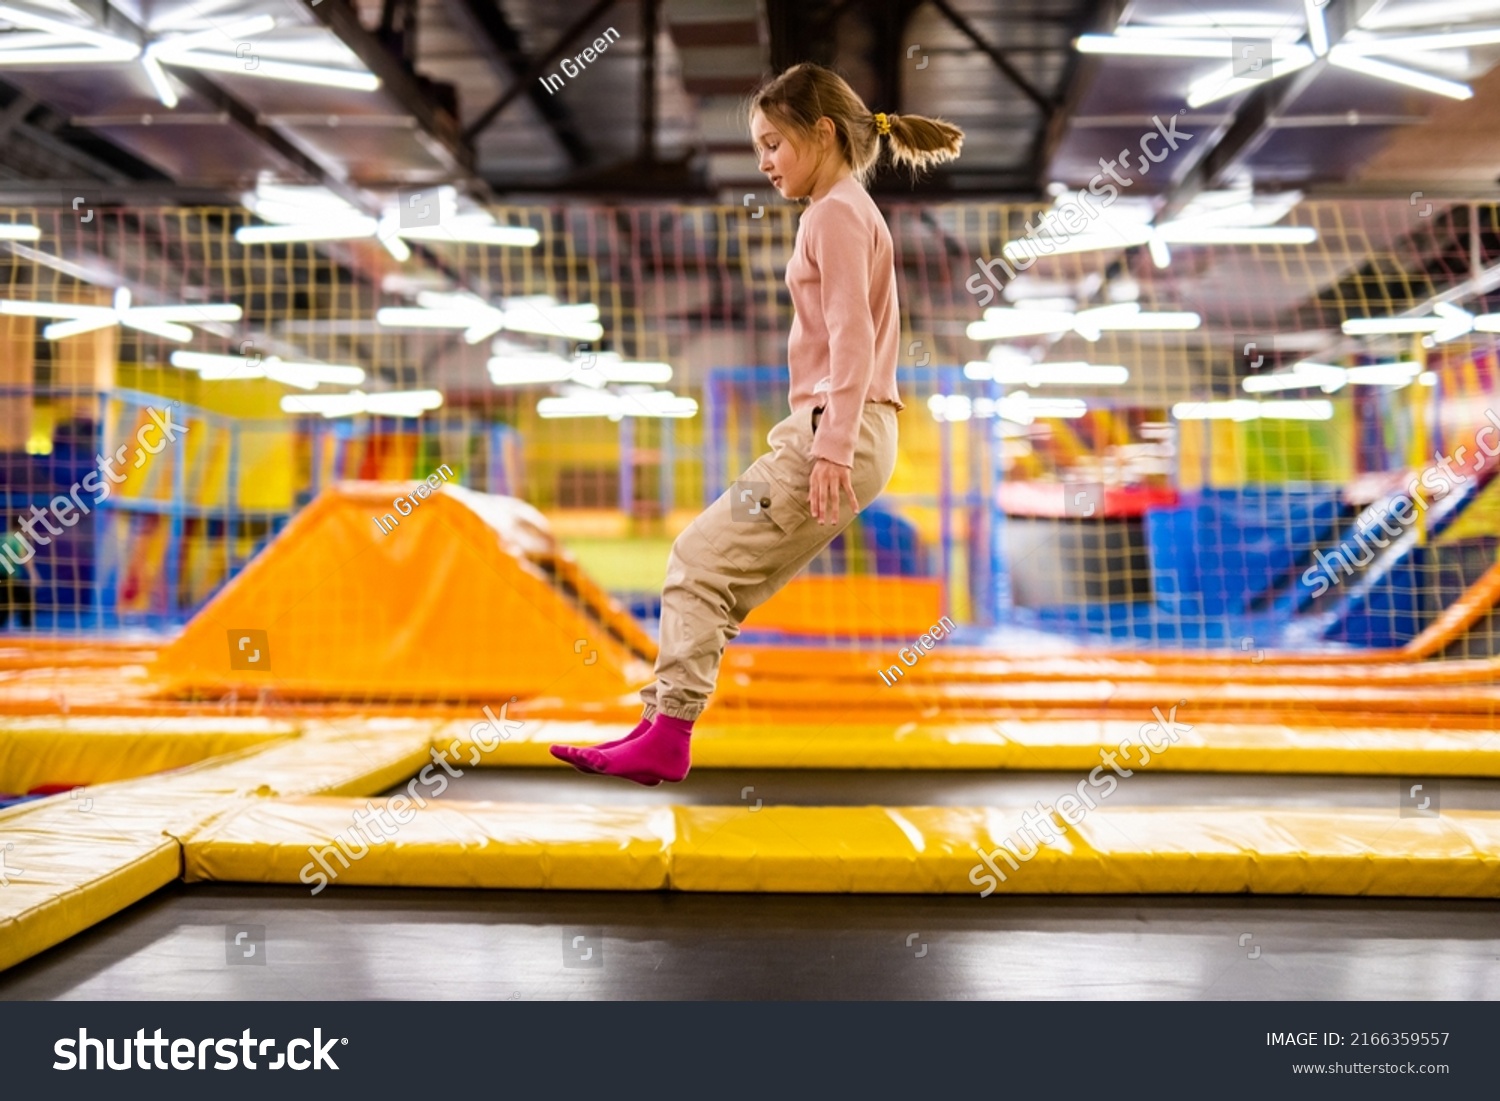 Cute girl kid jumping on trampoline and happy at playground park. Caucasian child in motion during active entertaiments #2166359557